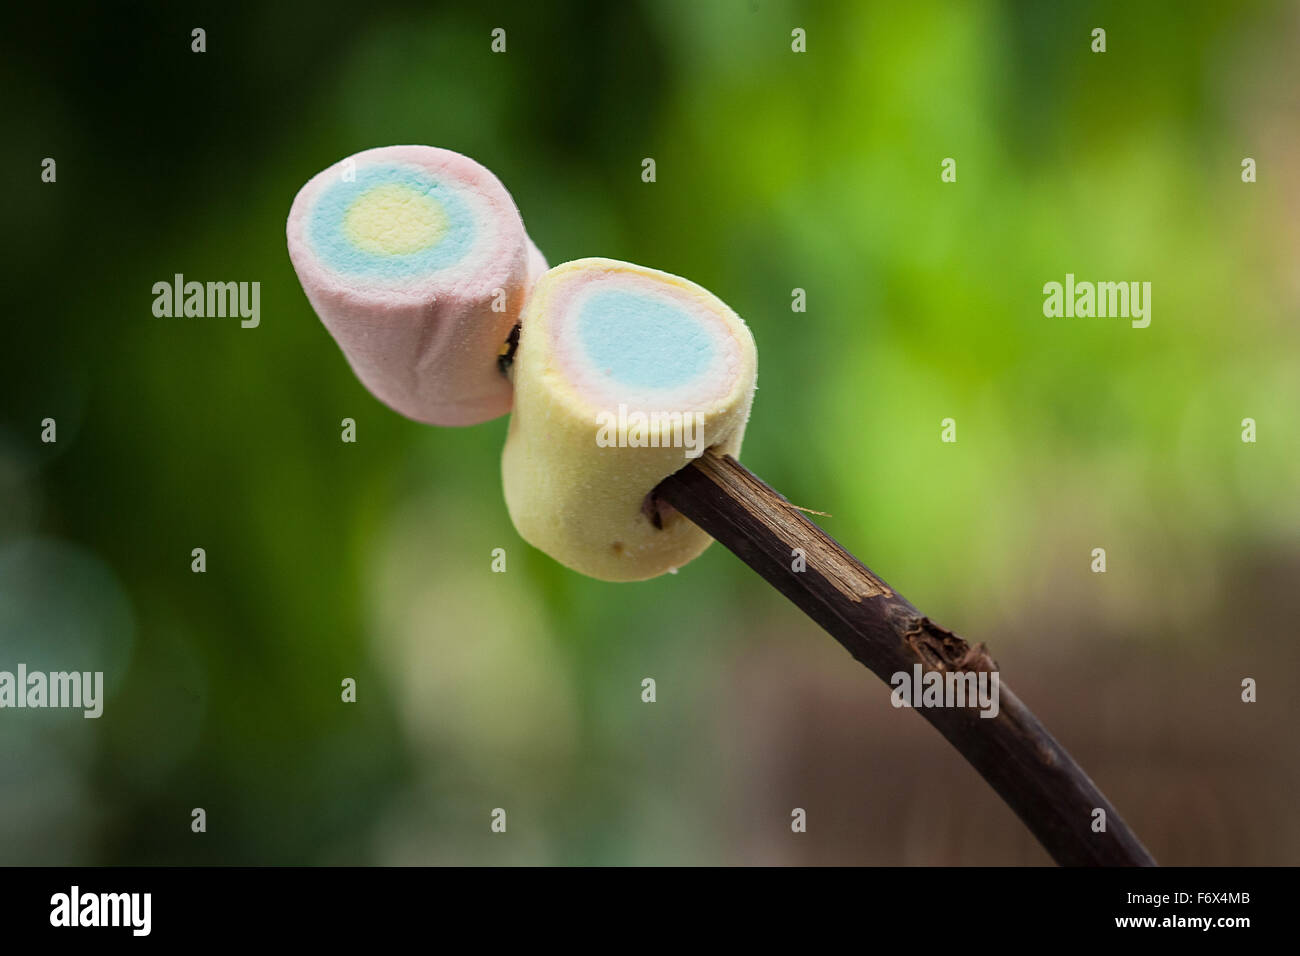 marshmallow in natural light and background blur effect green leaves Stock Photo